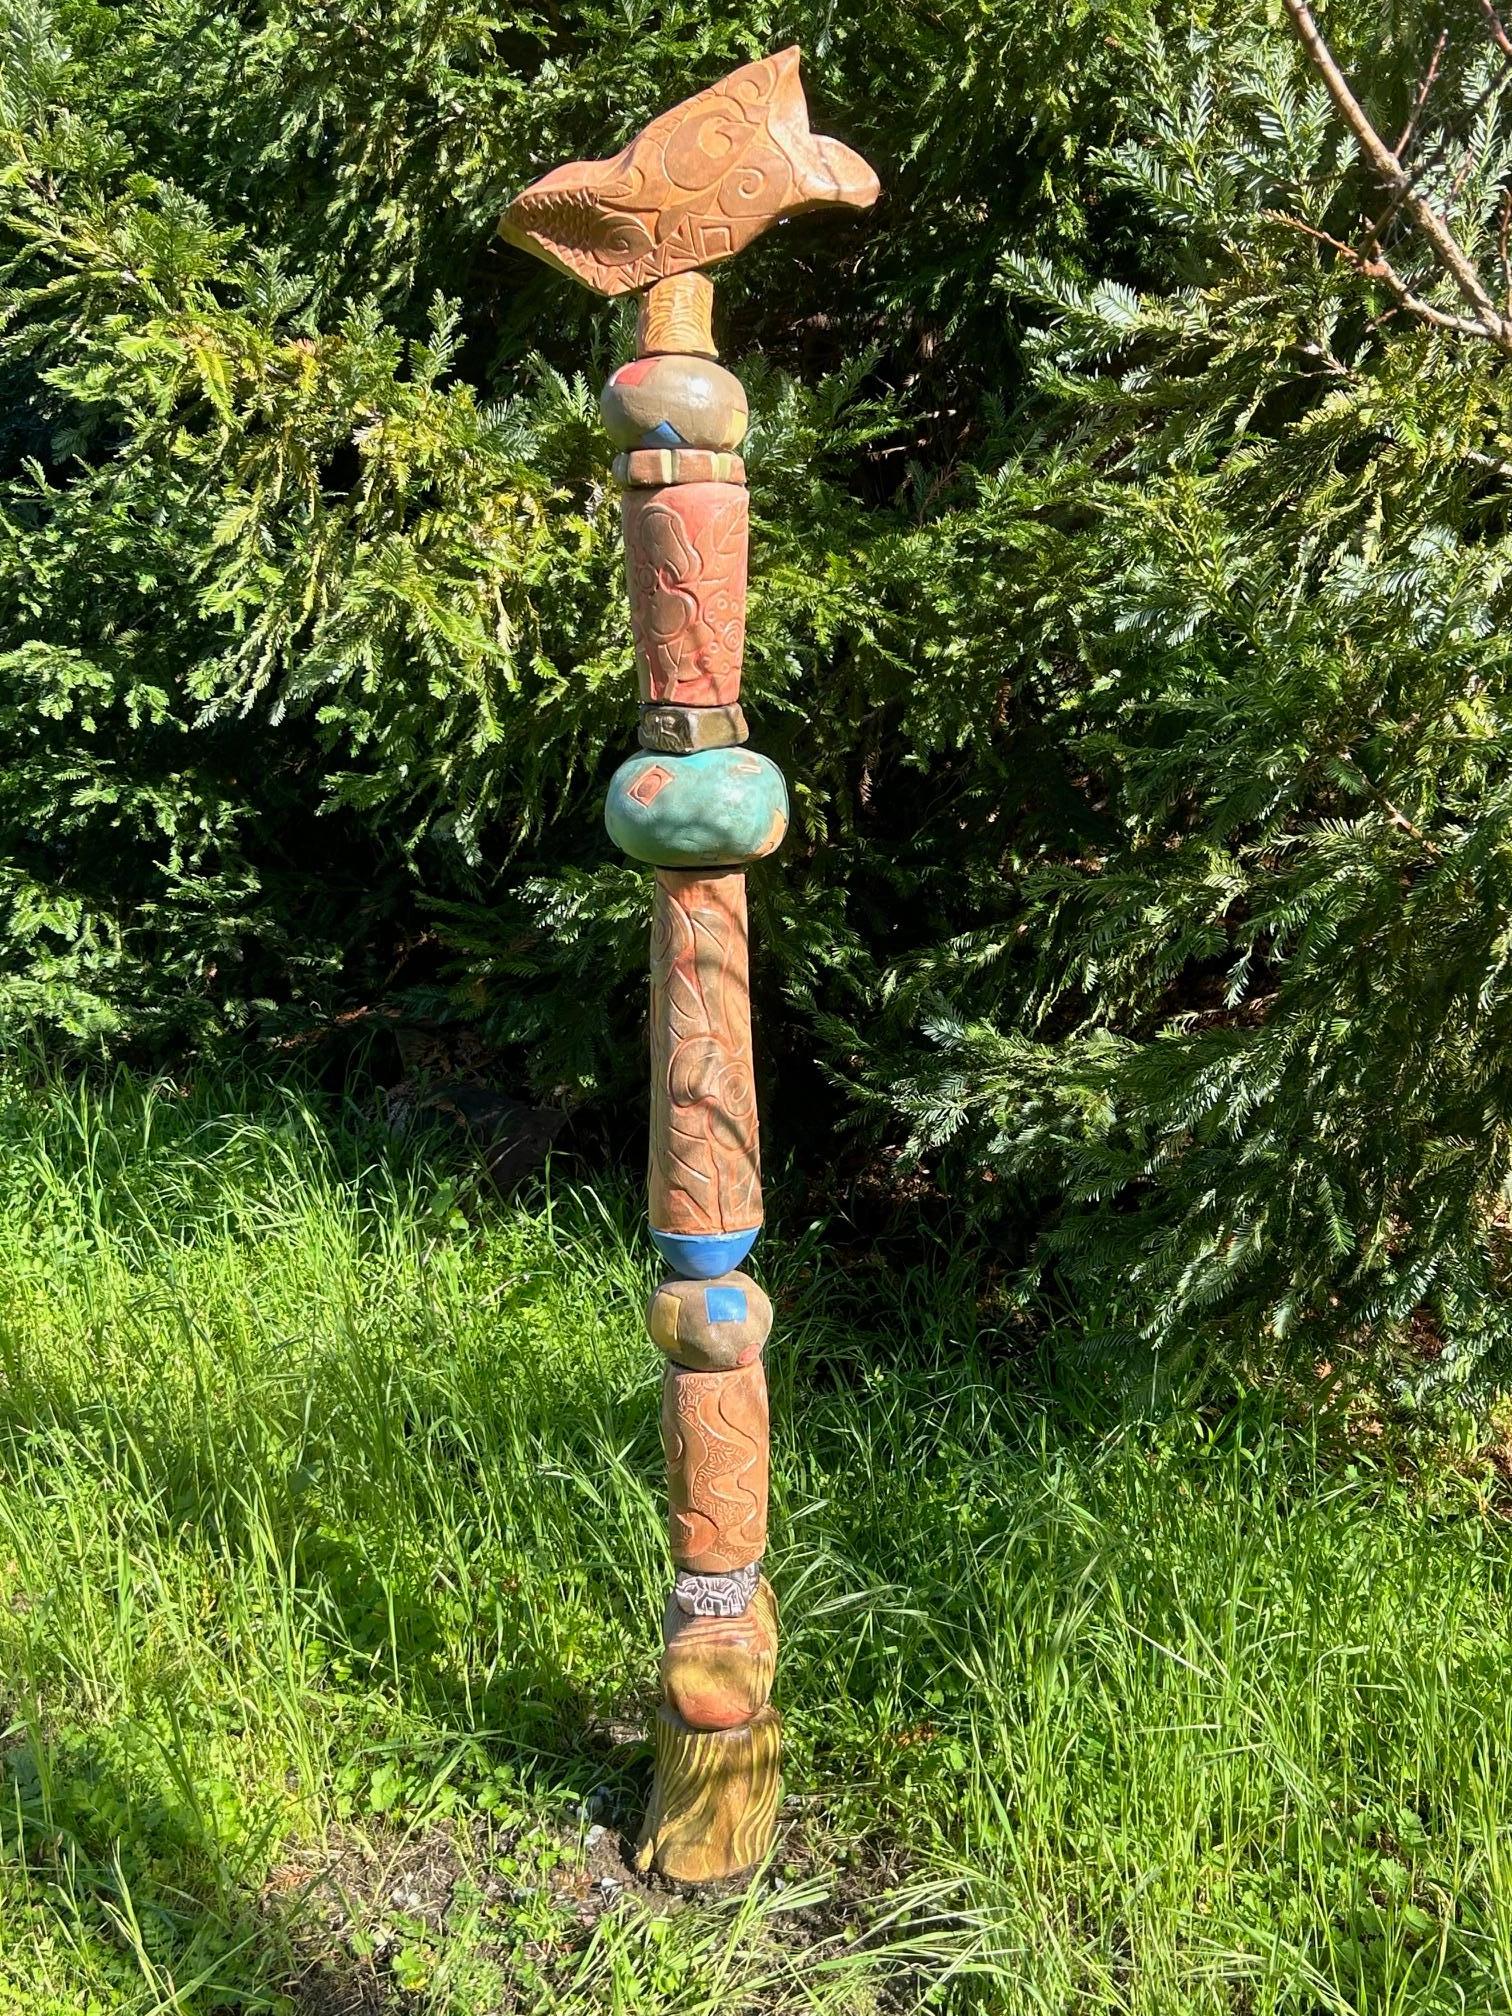 This masterpiece is exhibited in the Zimmerman Gallery, Carmel CA.

Please note: The base is not included. We will guide you through a simple installation process for outdoor or indoor placement.
--
"My natural flow with clay stems from my first